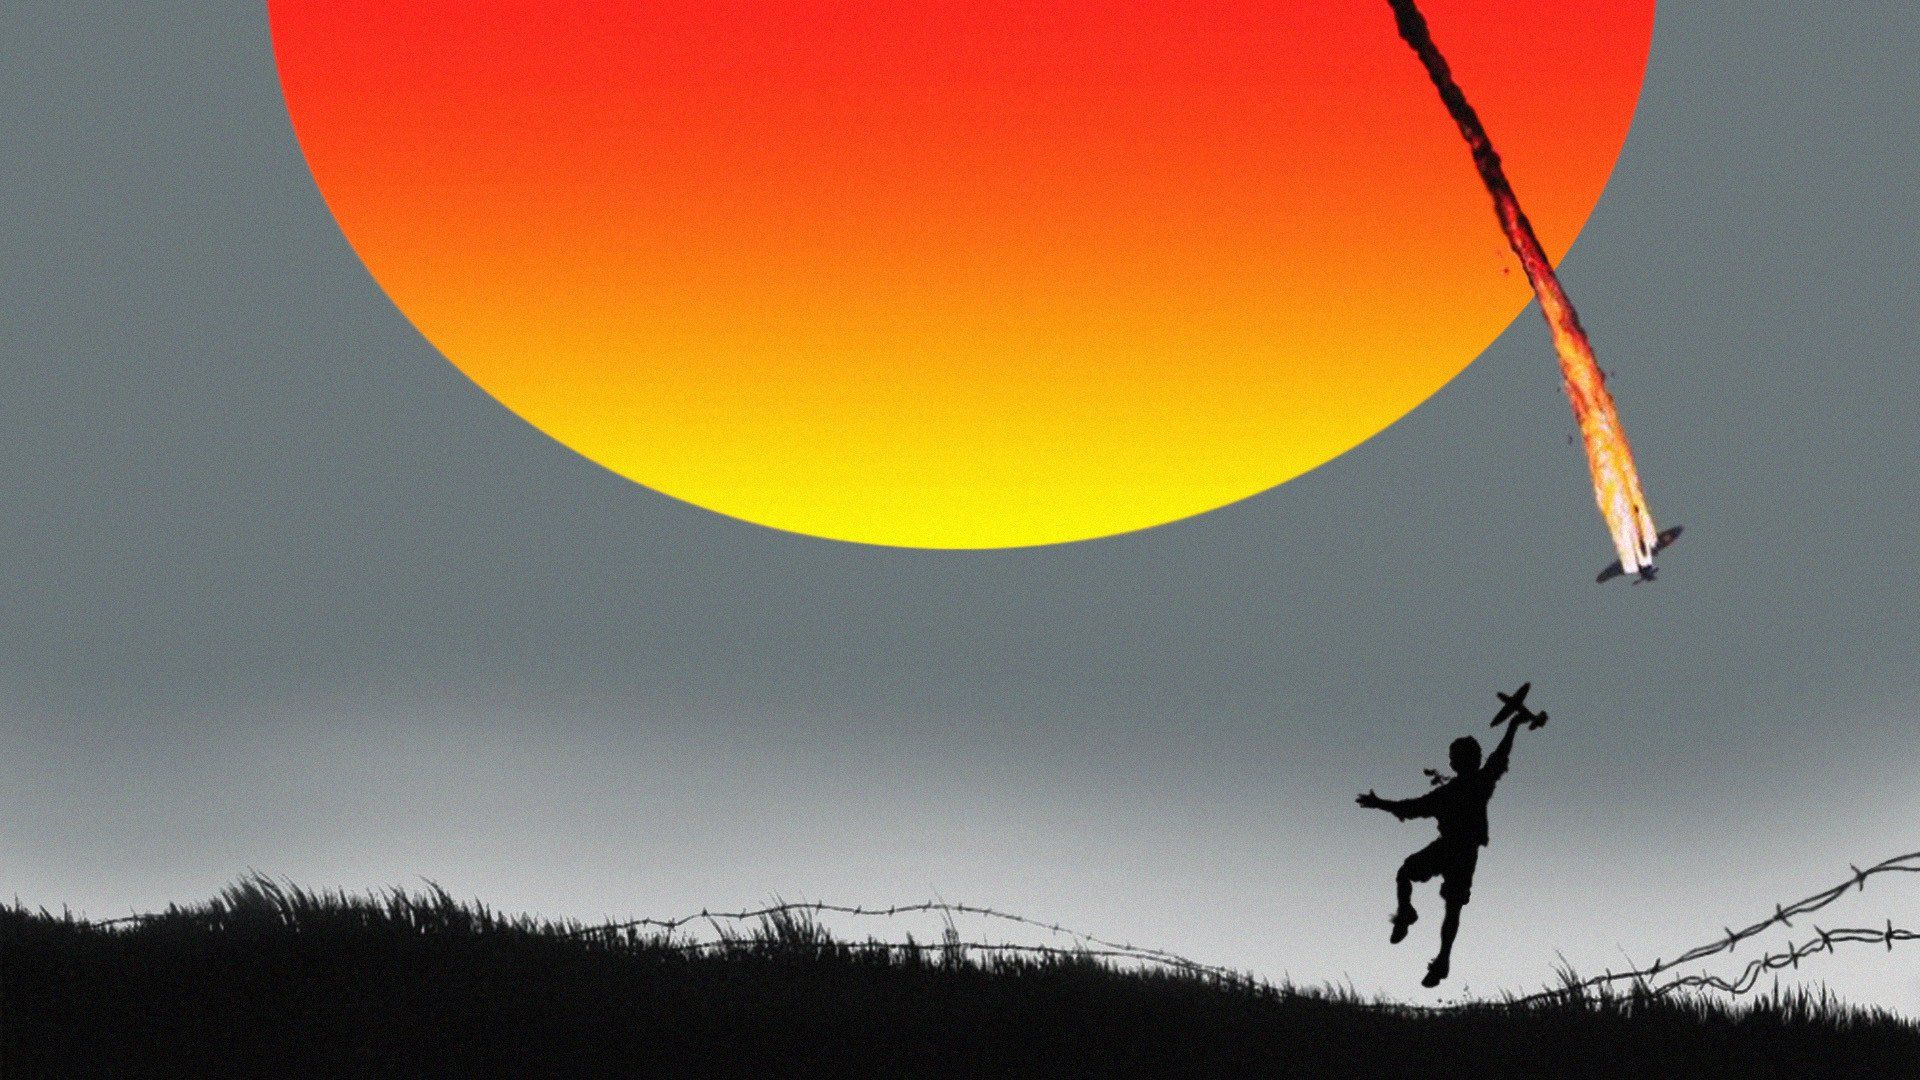 a large glowing red-yellow orb, a falling plane and a child holding a toy plane who is jumping over a barbed wire fence